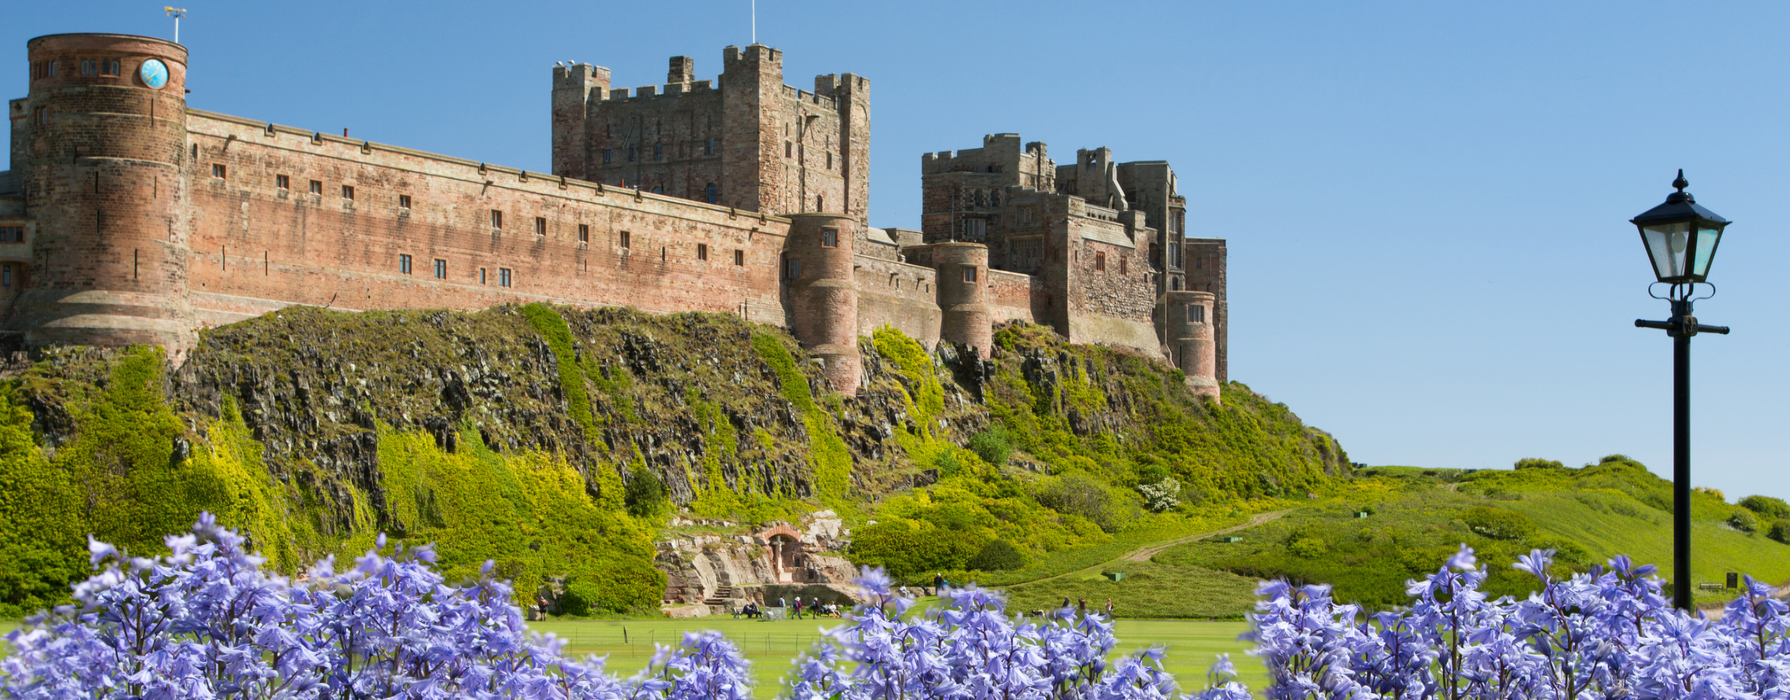 Bamburgh Castle with lavender flowers